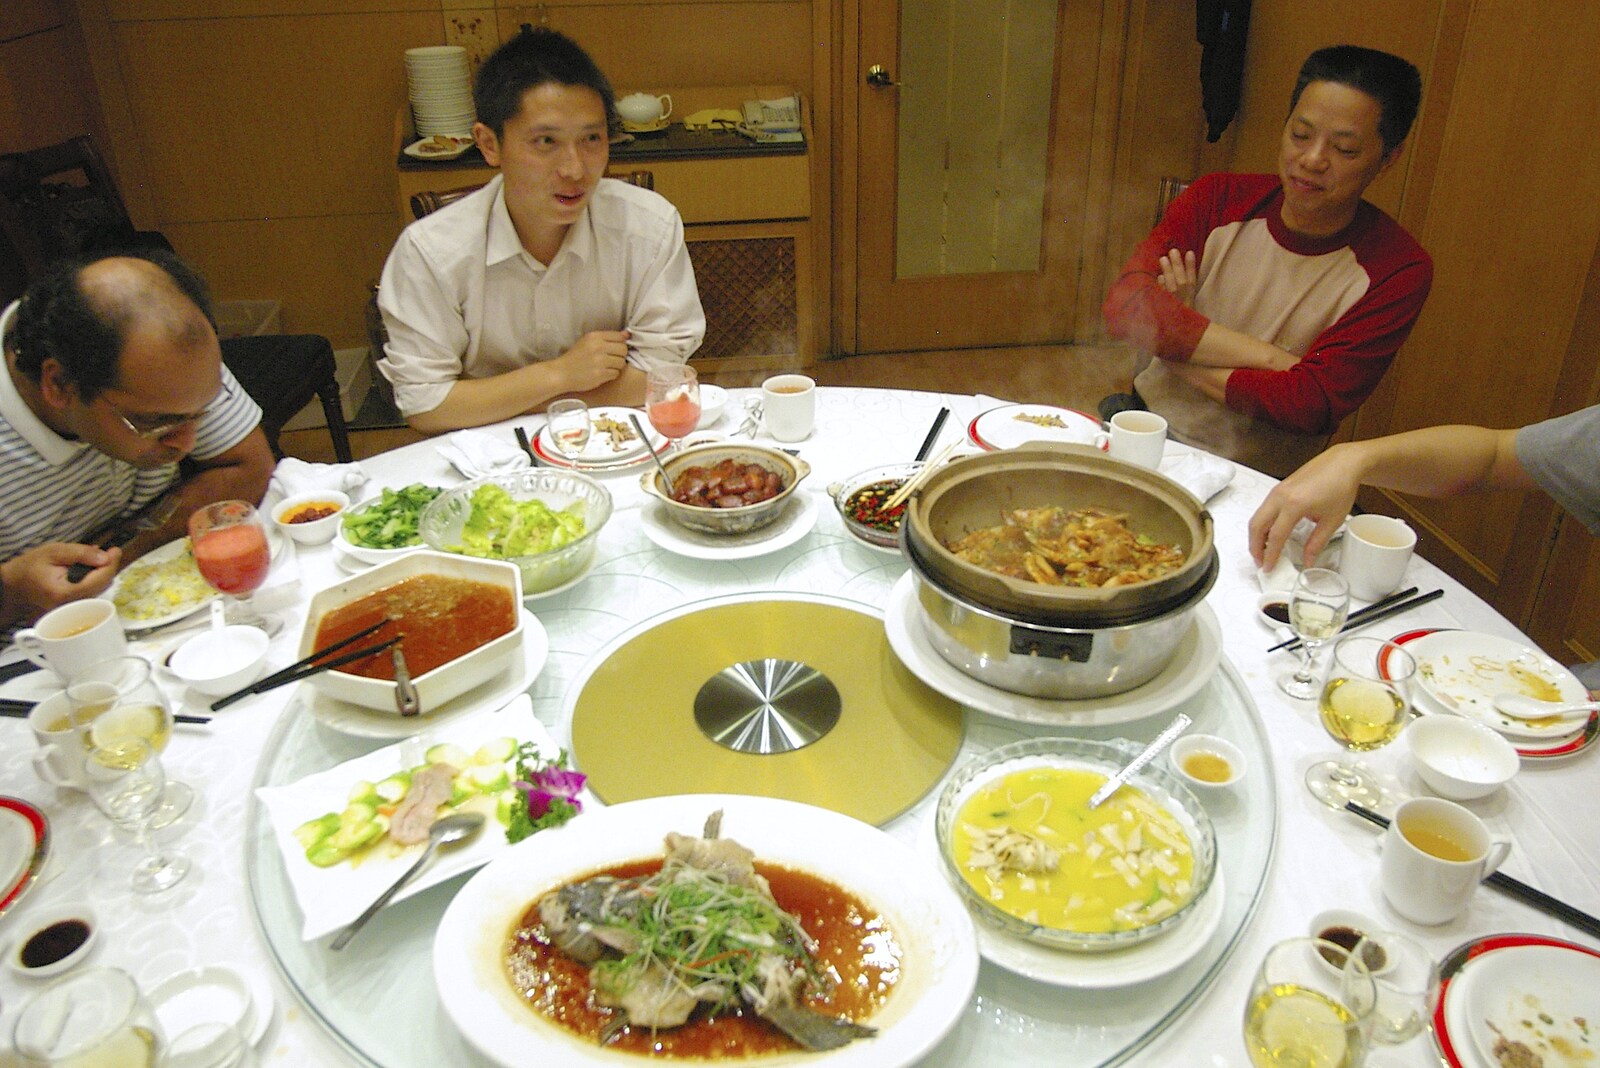 The latest food is inspected from Nanjing by Night, Nanjing, Jiangsu Province, China - 4th October 2006